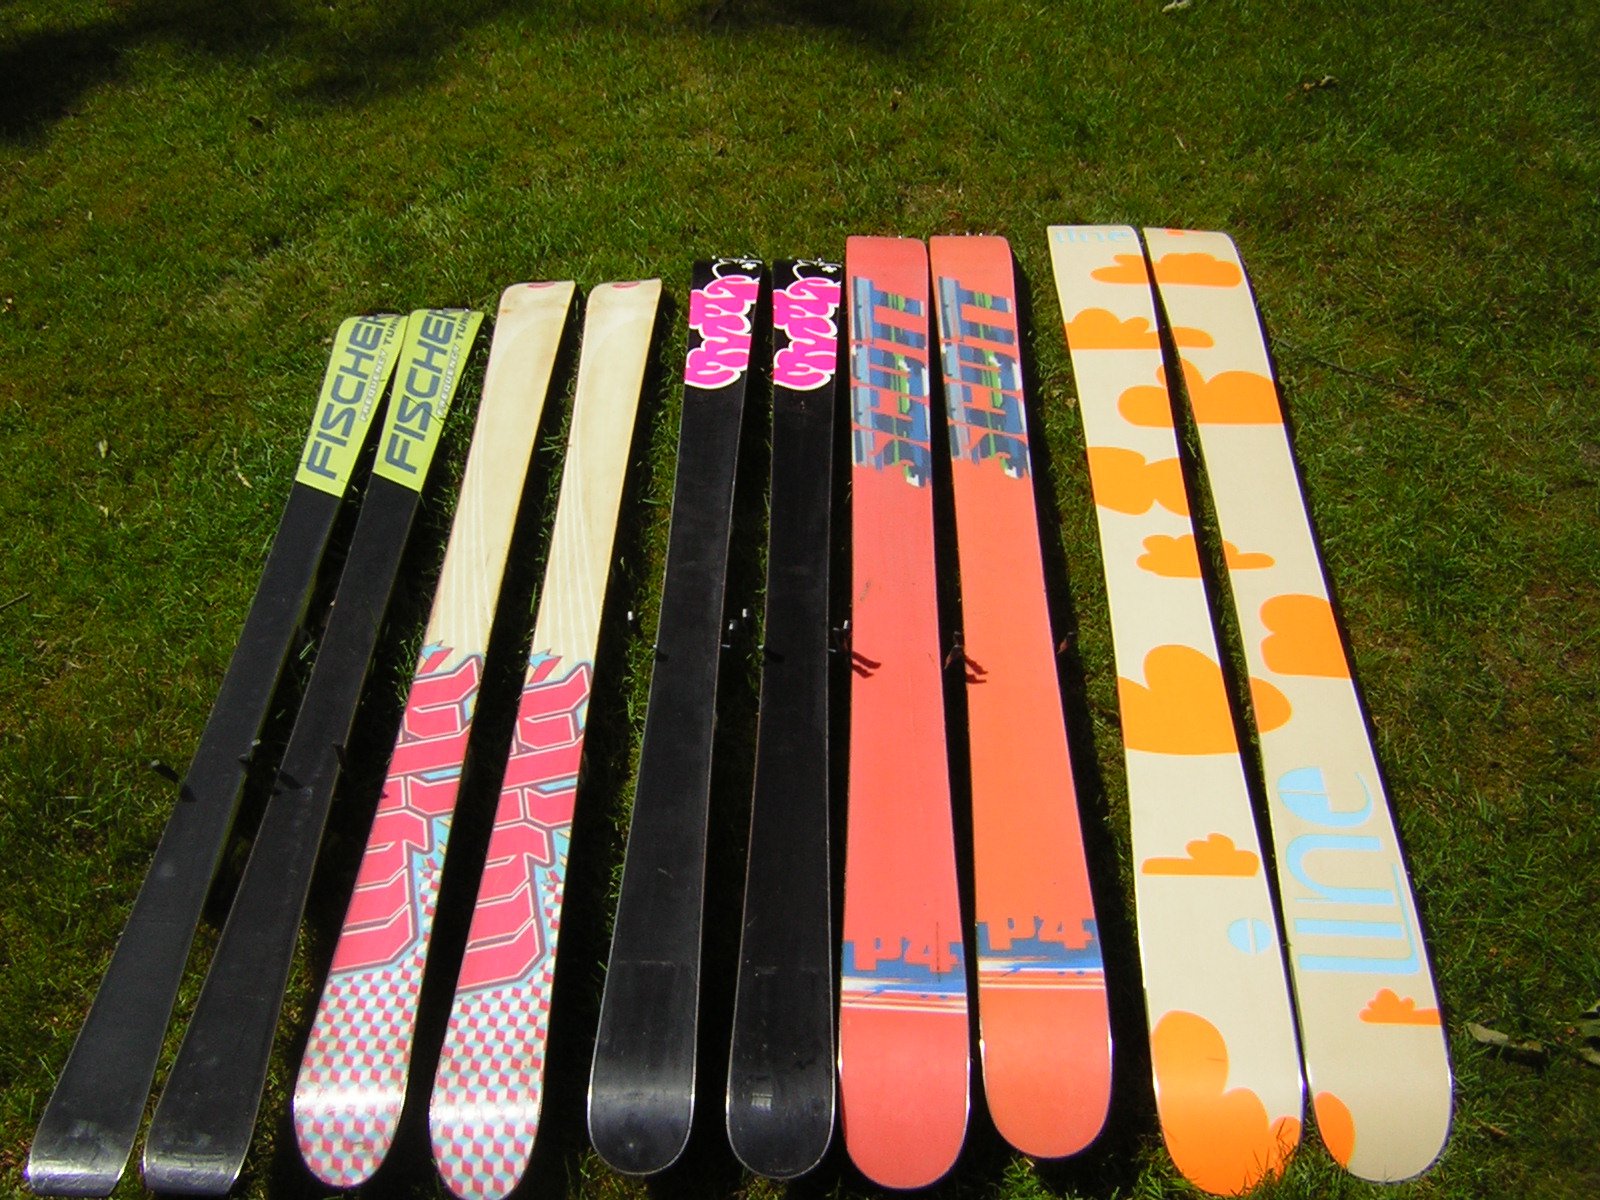 My quiver, bases